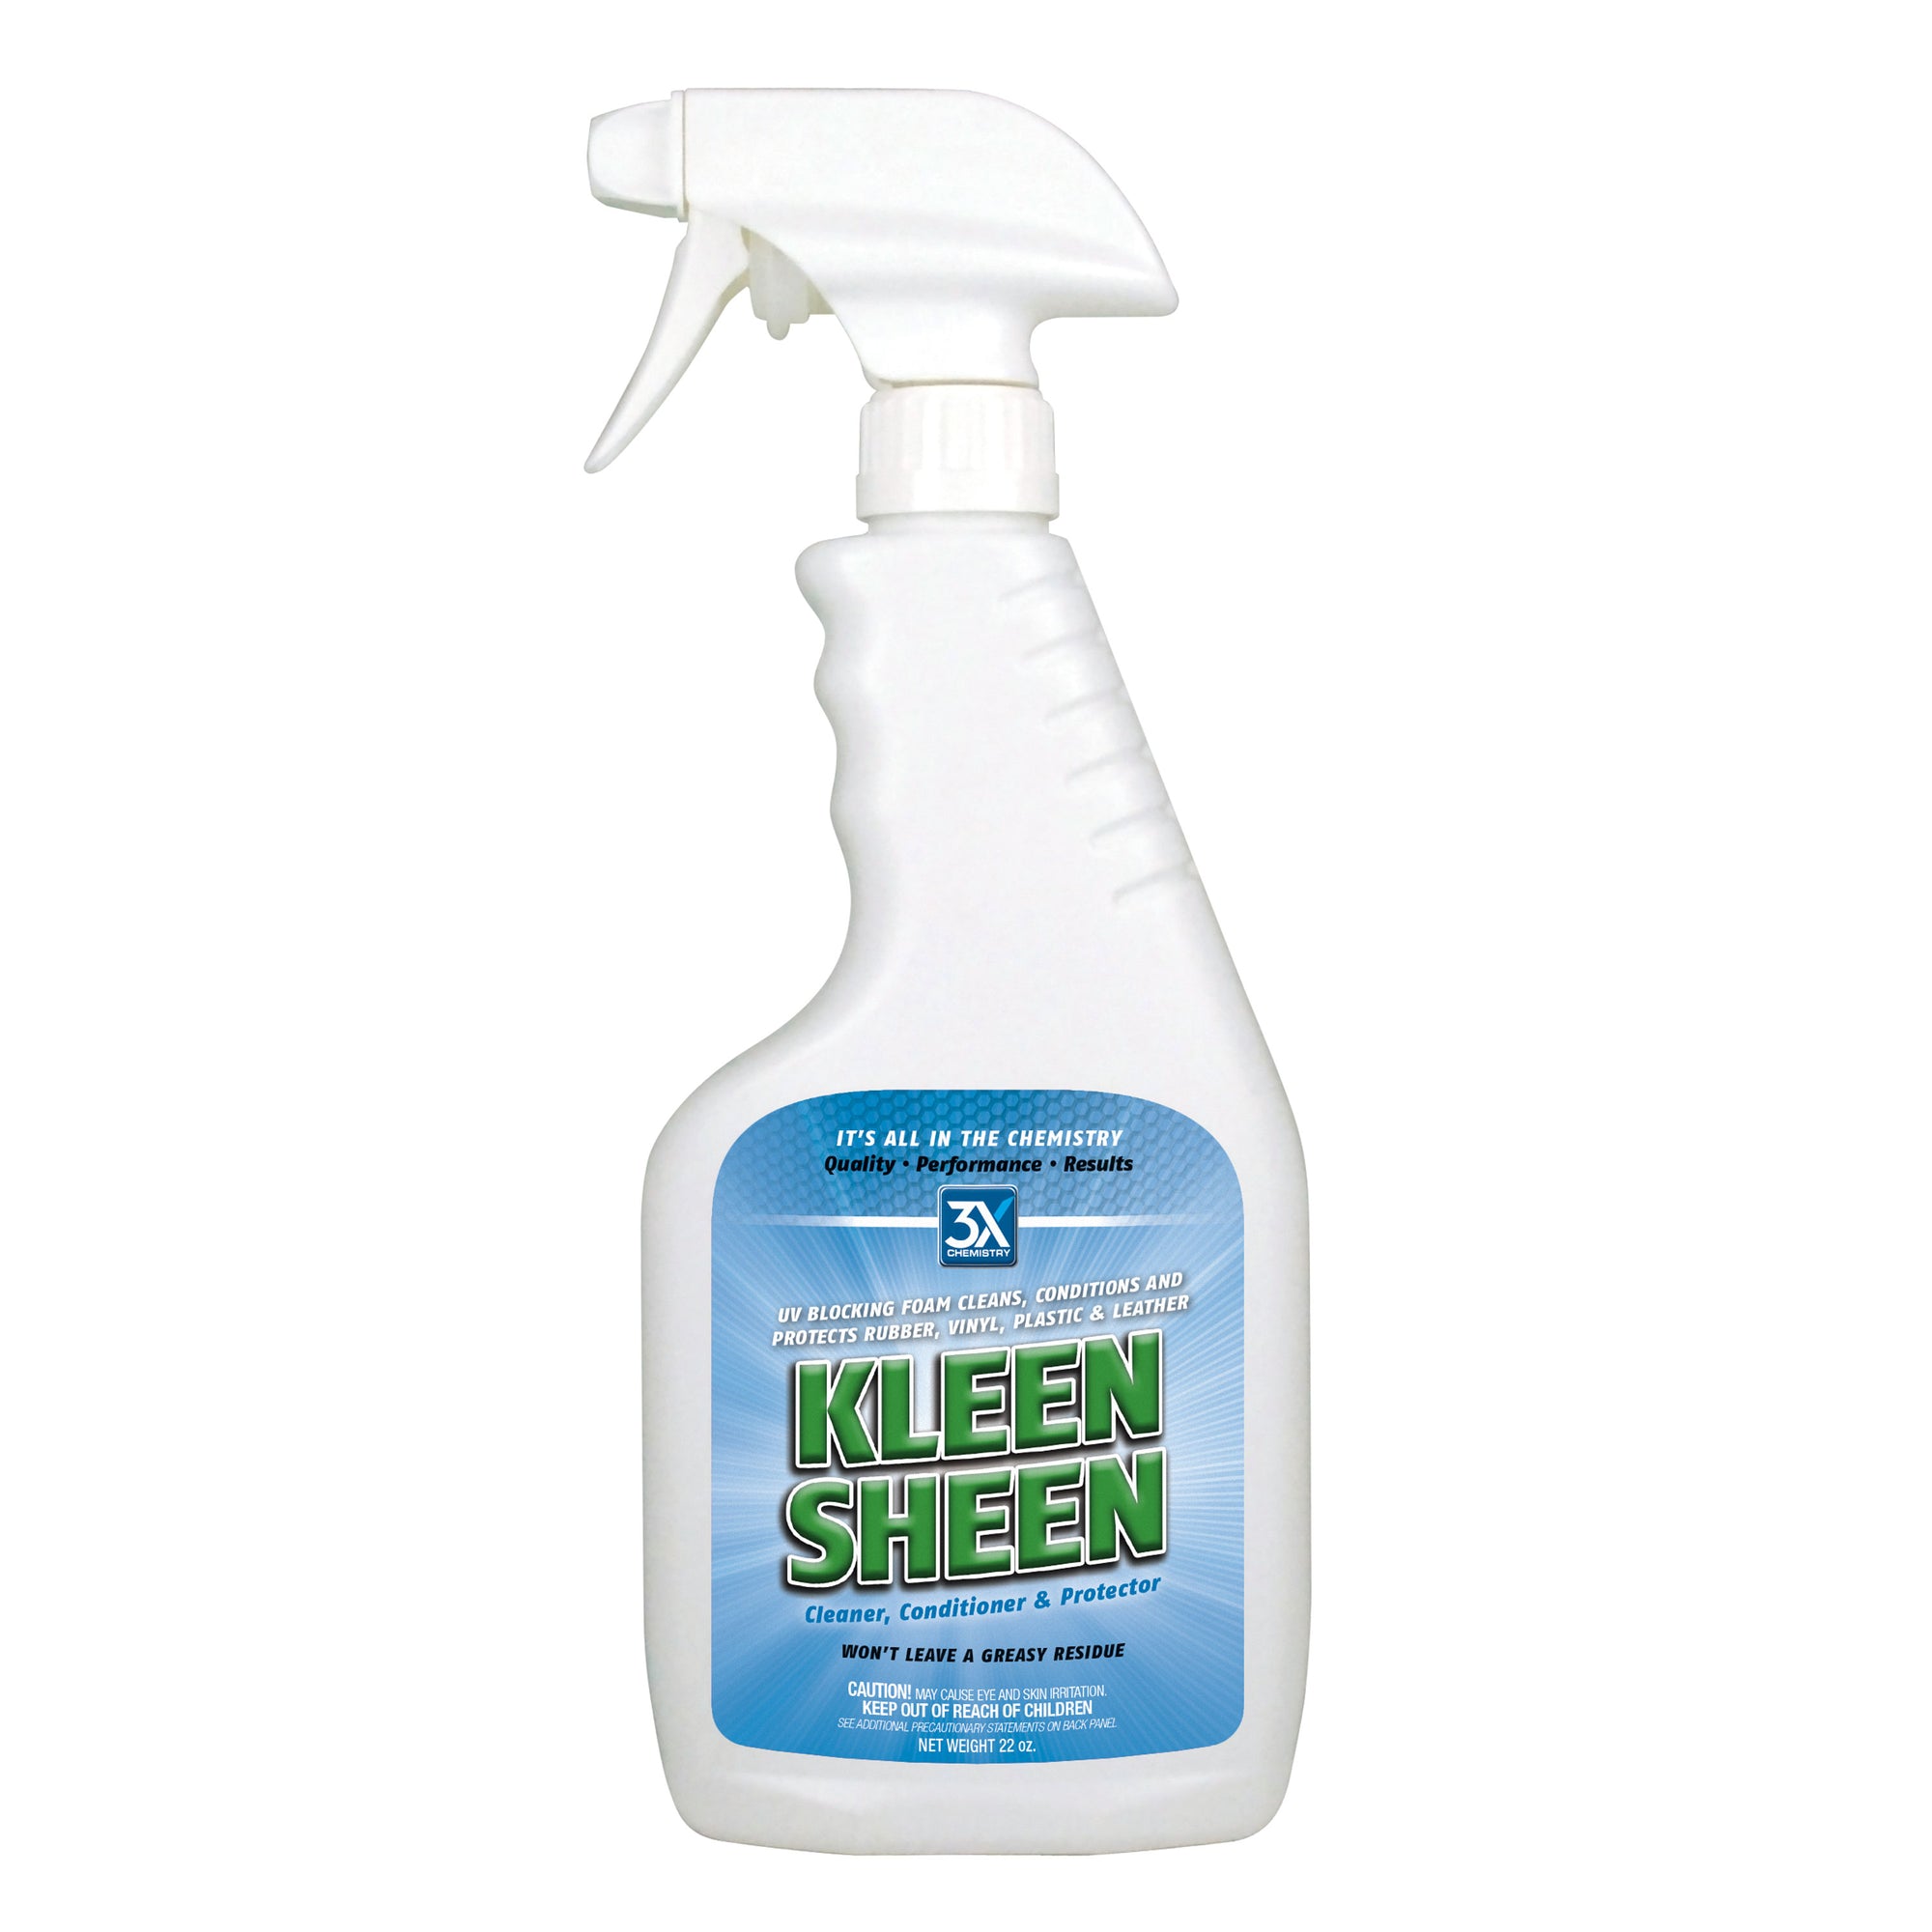 3X Chemistry 130 Kleen Sheen Cleaner, Conditioner and Protector - 22 oz. Spray Bottle